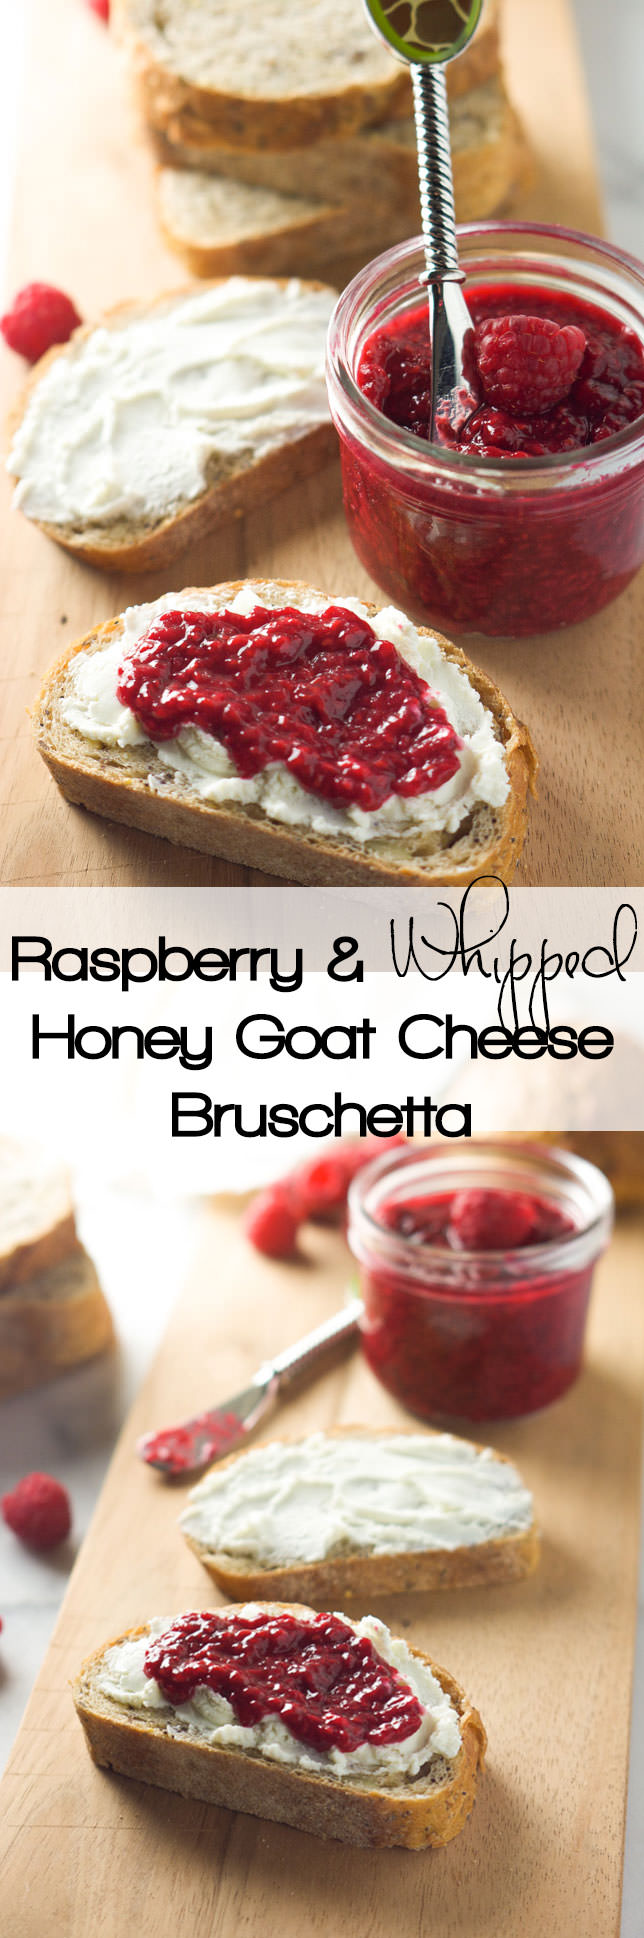 A quick, 4 ingredient appetizer! Raspberry and Whipped Honey Goat Cheese Brushcetta is sweet, savory and crunchy all in one bite![